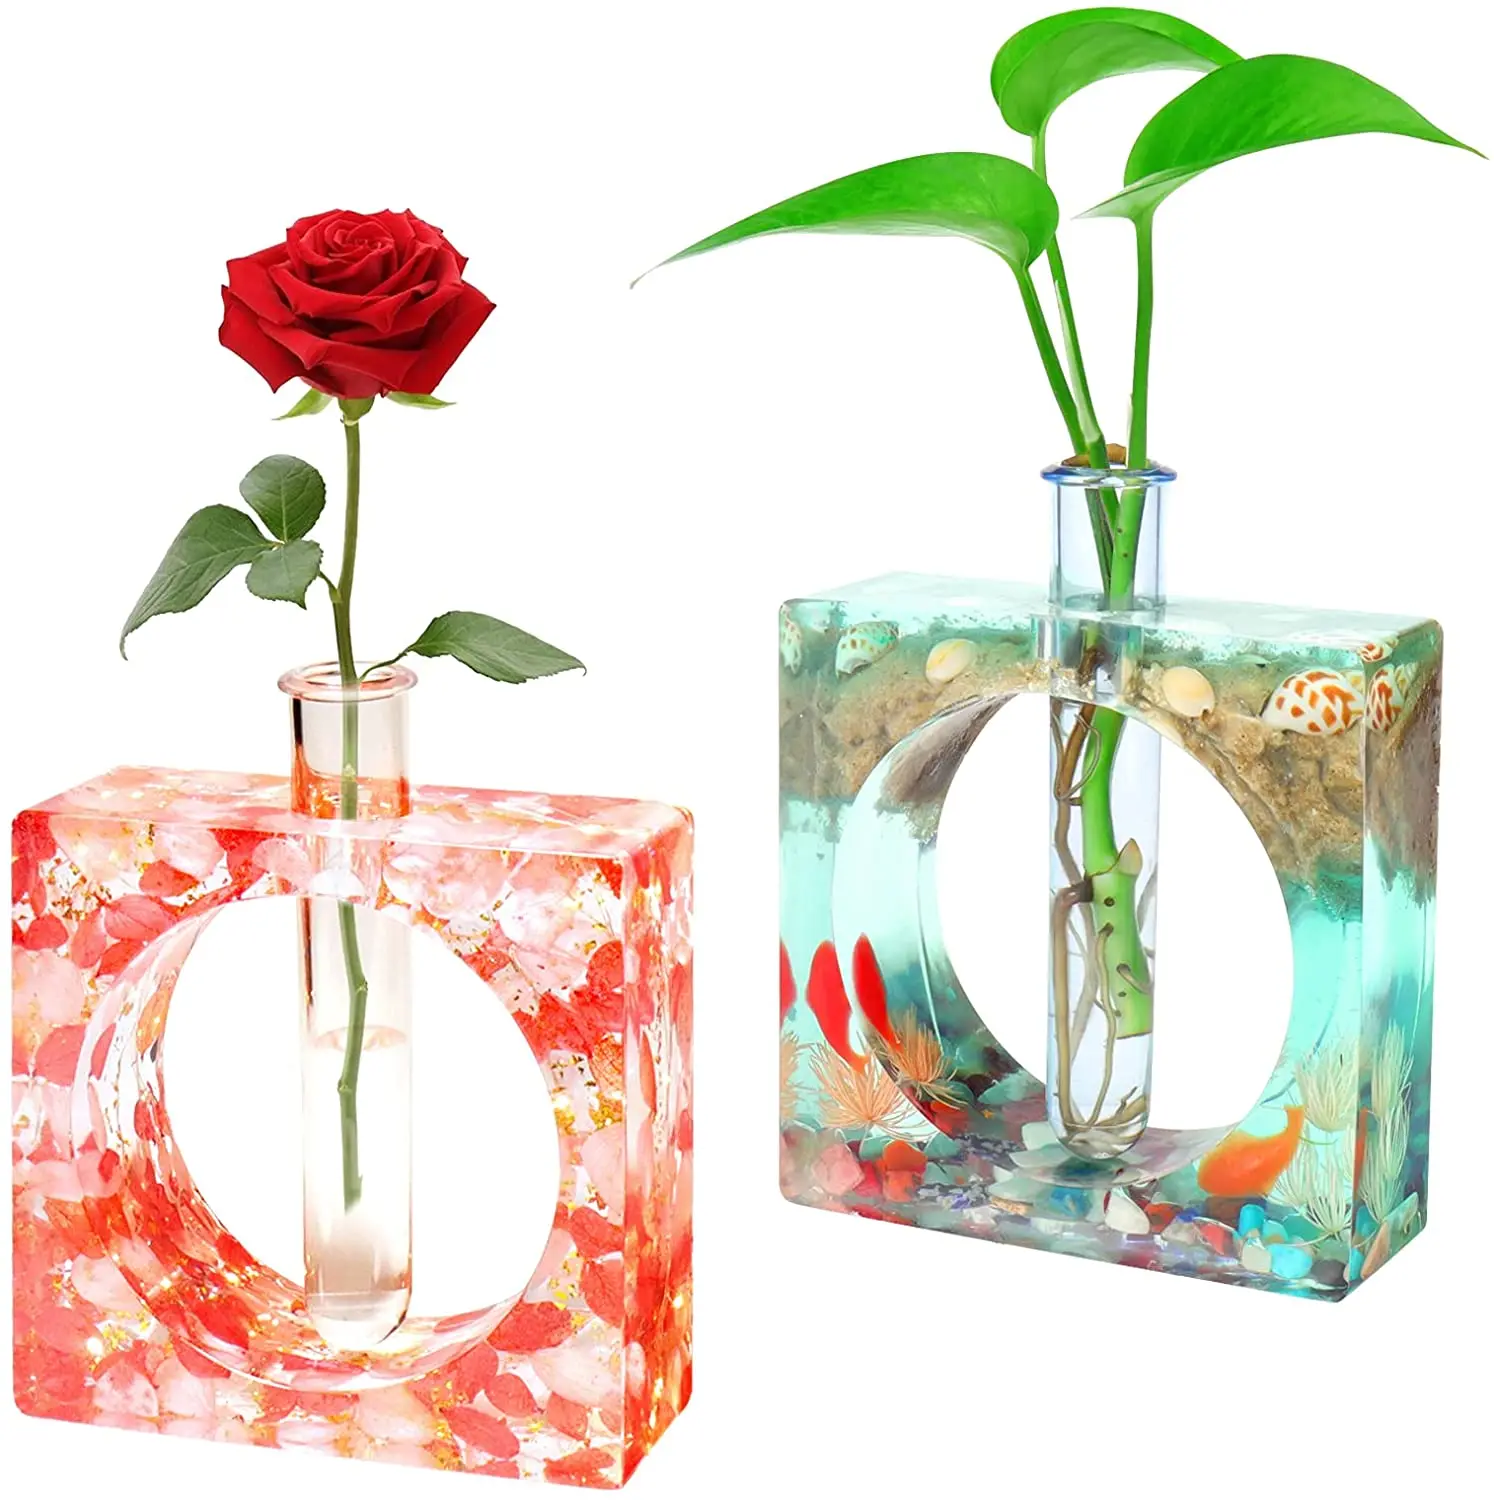 

Resin Mold Plant Propagation Station Epoxy Vase Silicone Mold Resin Casting Mold with 6 Test Tubes DIY Home Flower Vase Decor, White